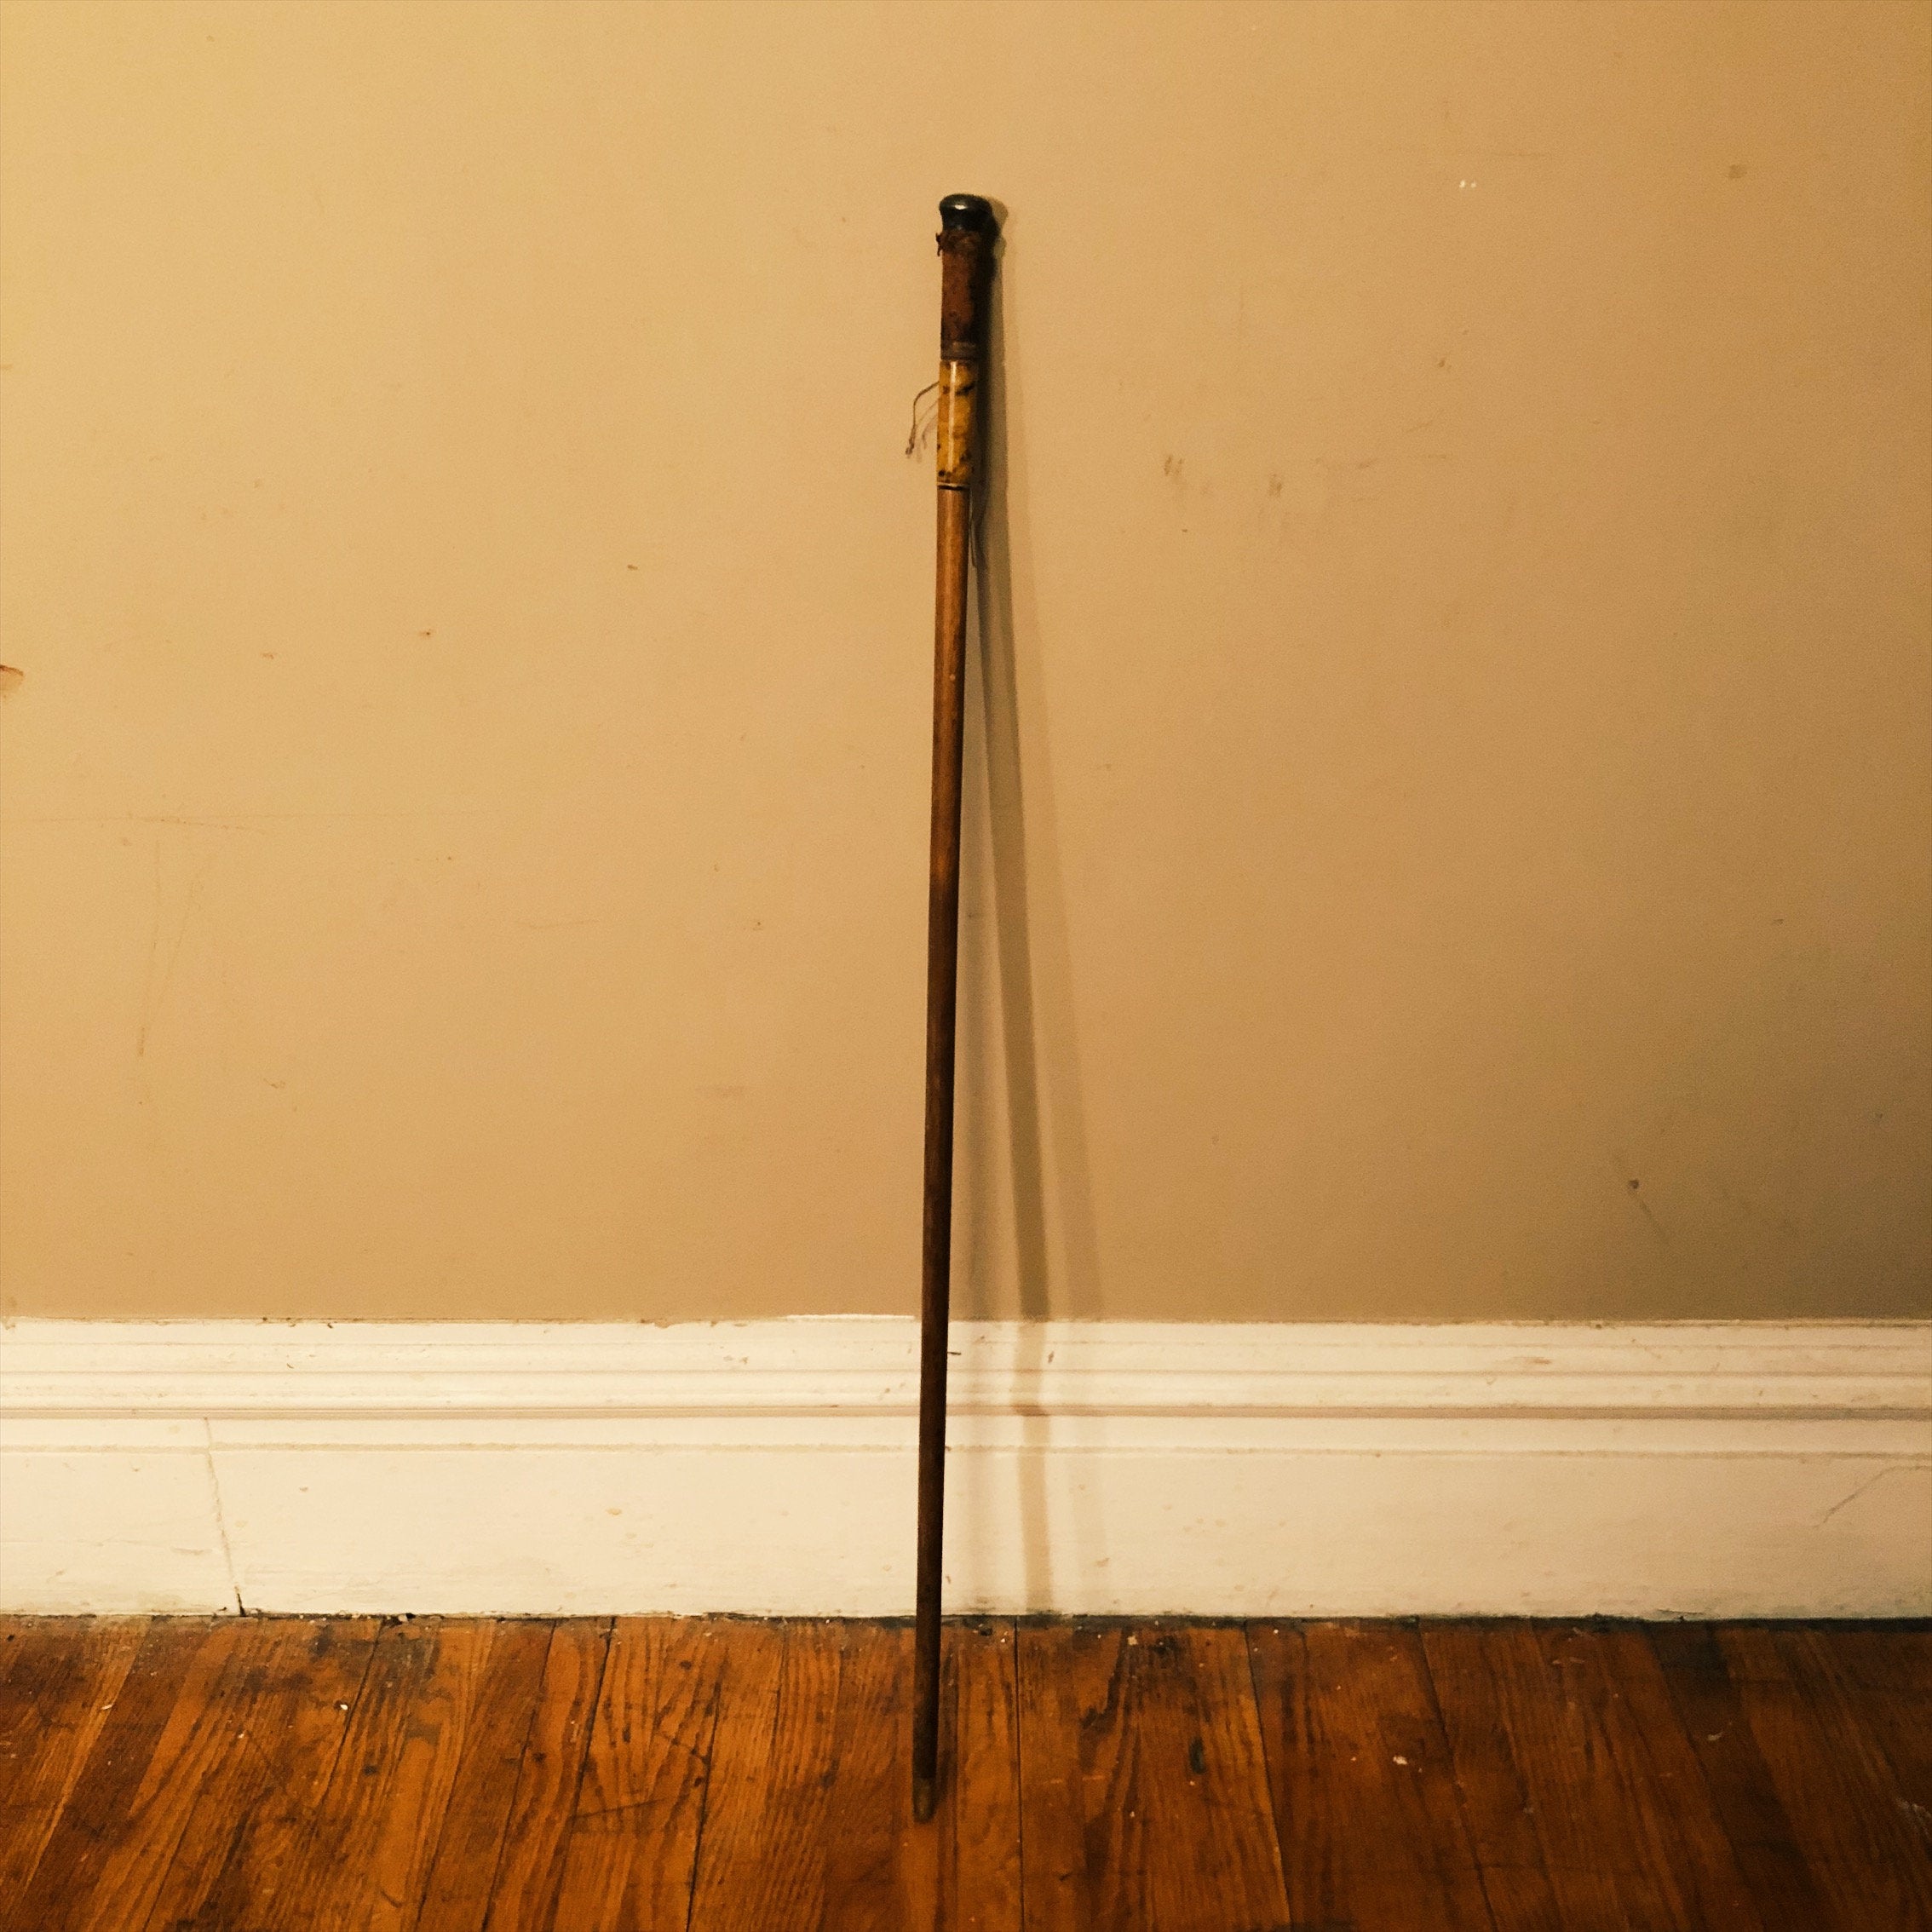 Antique Walking Cane with Sterling Silver Cap - Early 1900s? - Inlay - Antique Wood Walking Stick - Vintage Walking Canes - Rare Form